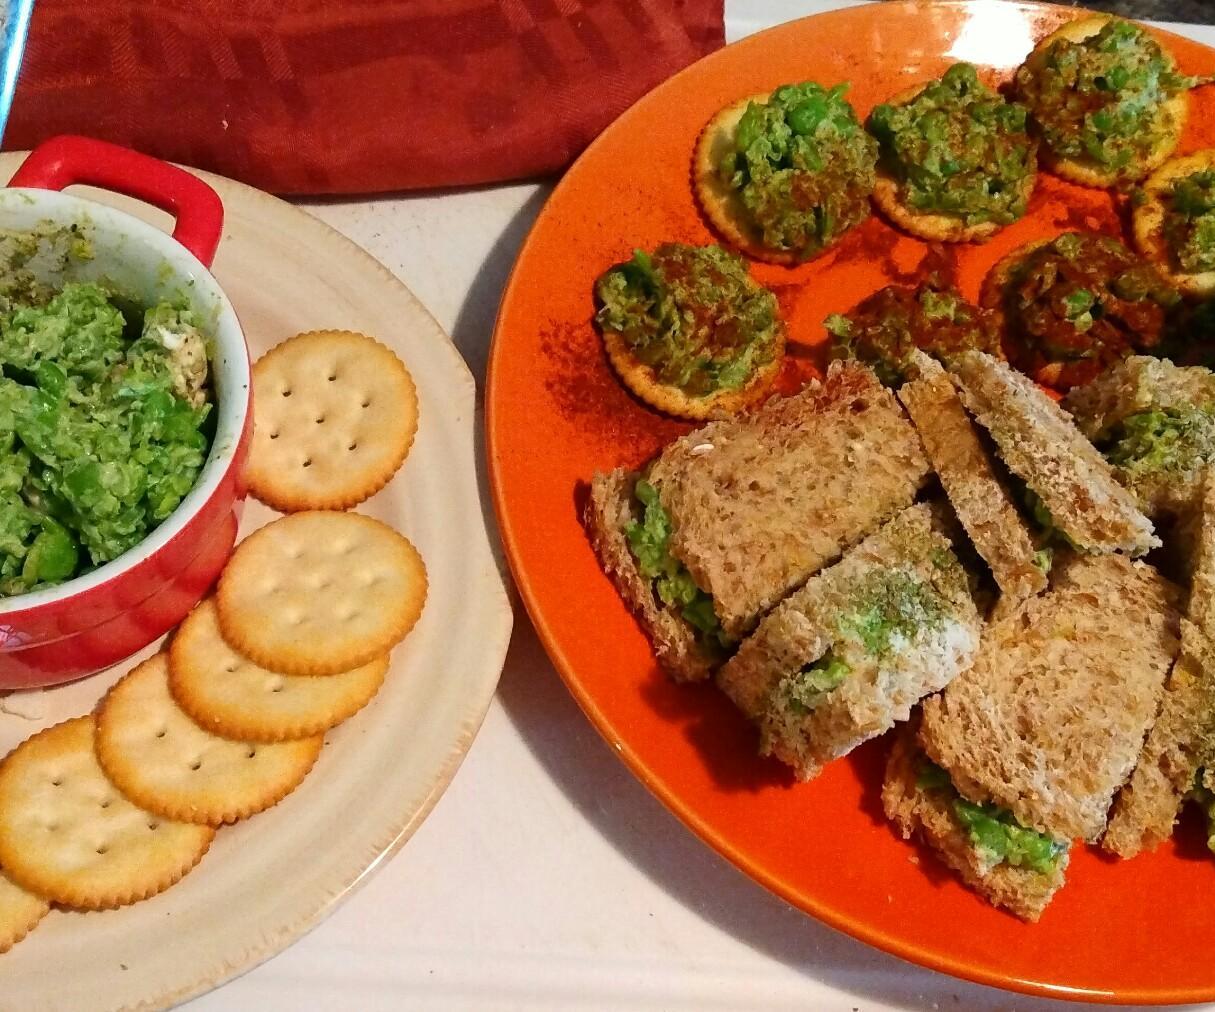 (LICKETY-SPLIT) PEA DIP FINGER SANDWICHES / HORS D'OEUVRES